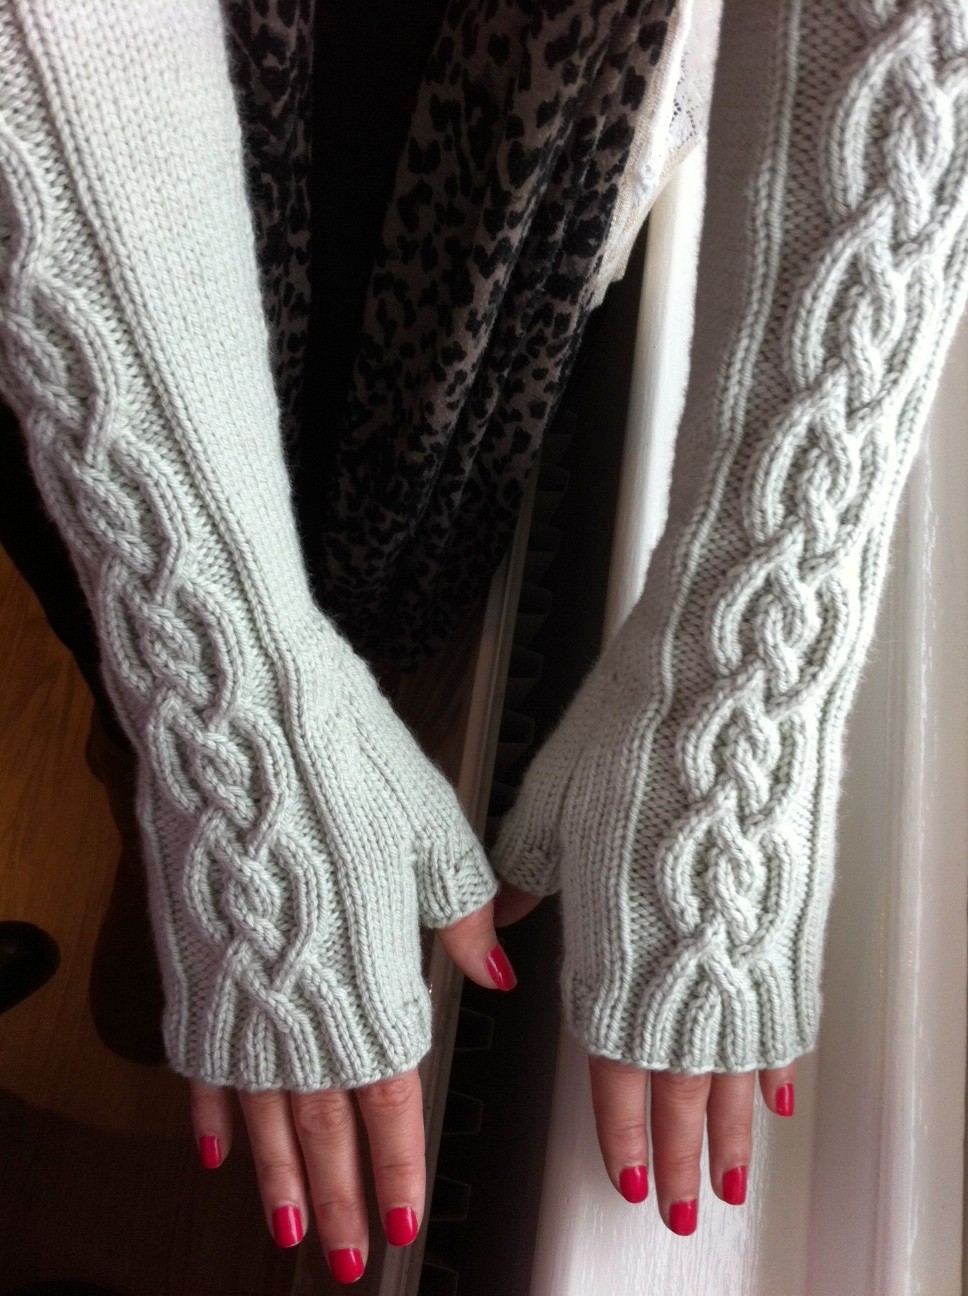 Wrist and Hand Warmer Knitting Patterns In the Loop Knitting